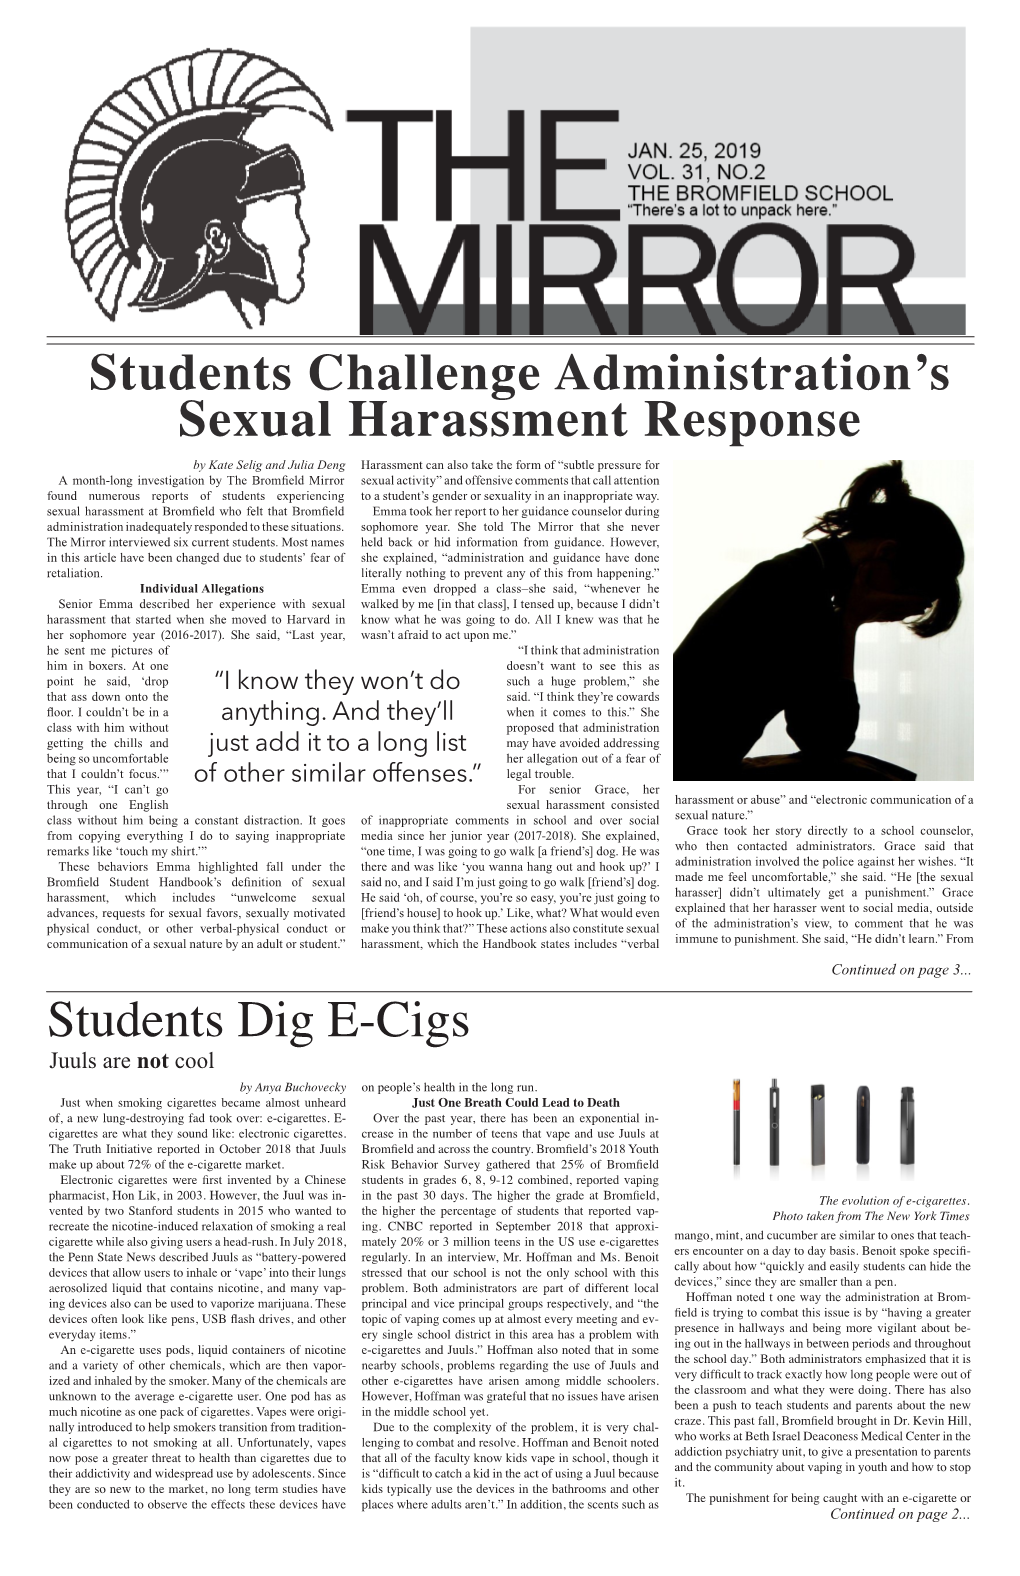 Students Challenge Administration's Sexual Harassment Response